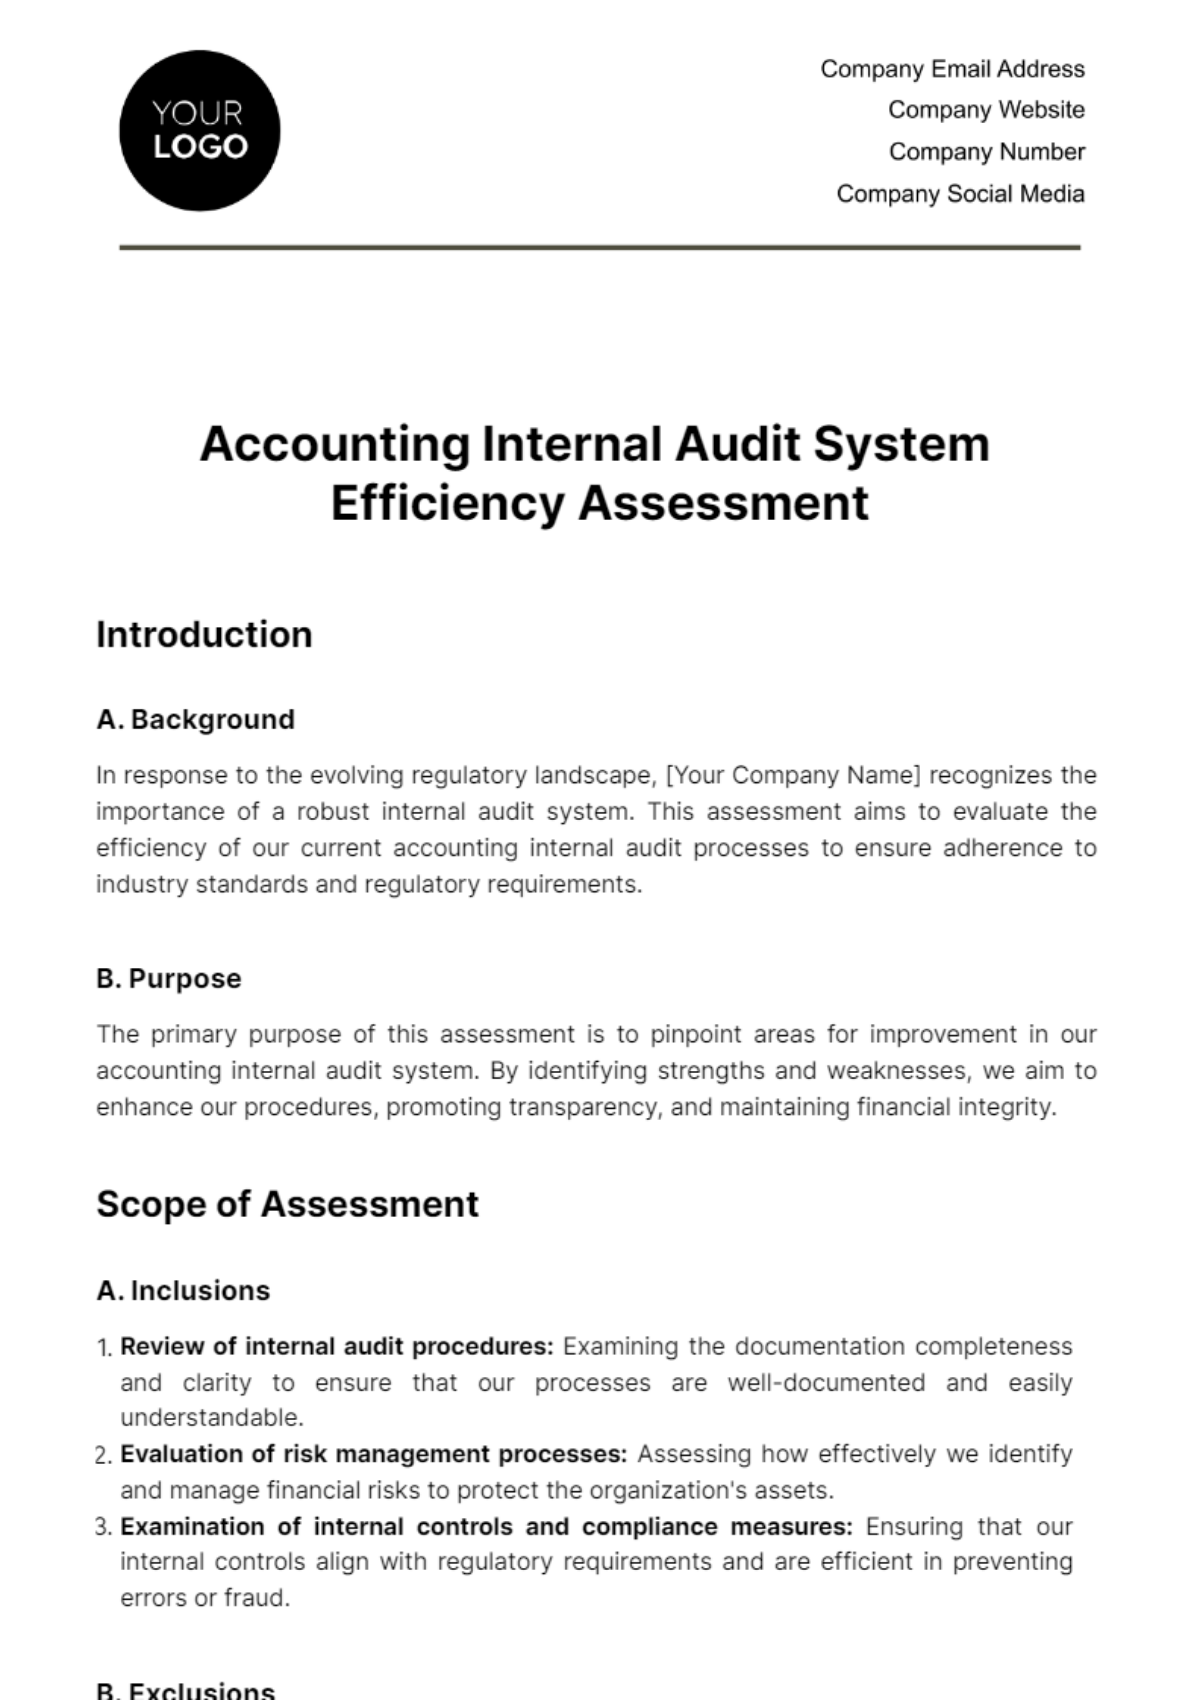 Free Accounting Internal Audit System Efficiency Assessment Template